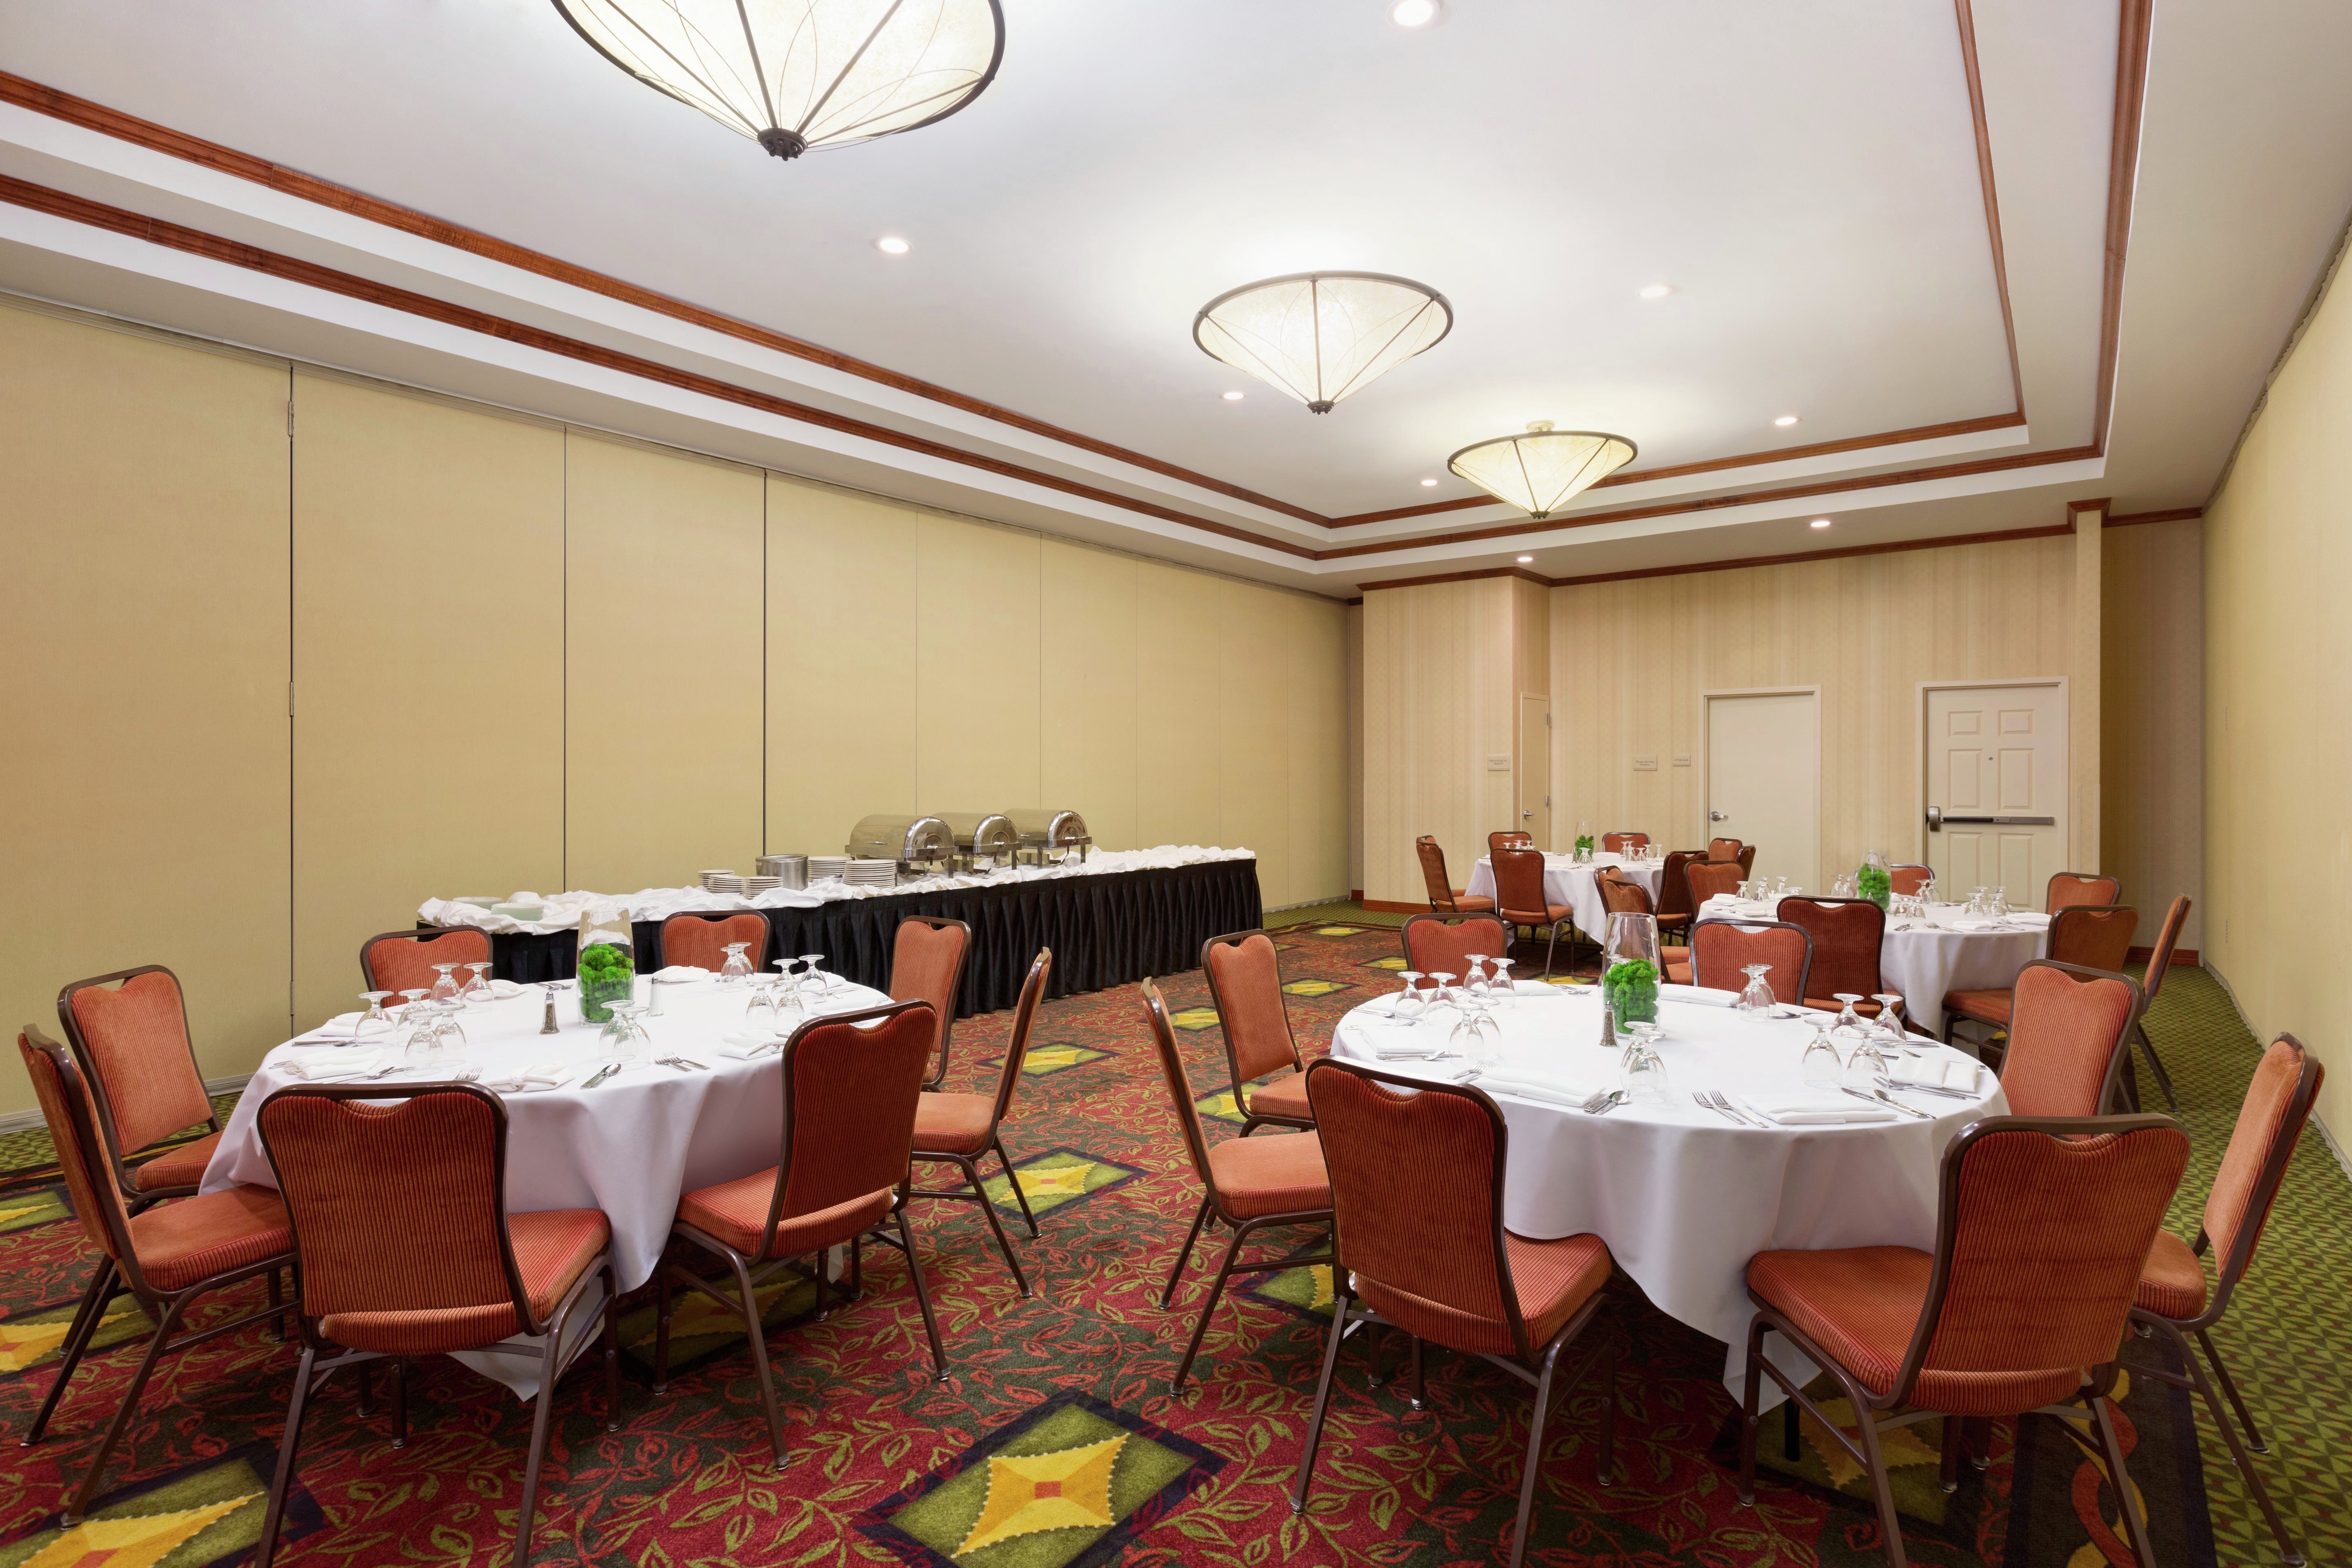 Meeting Room with Banquet Tables